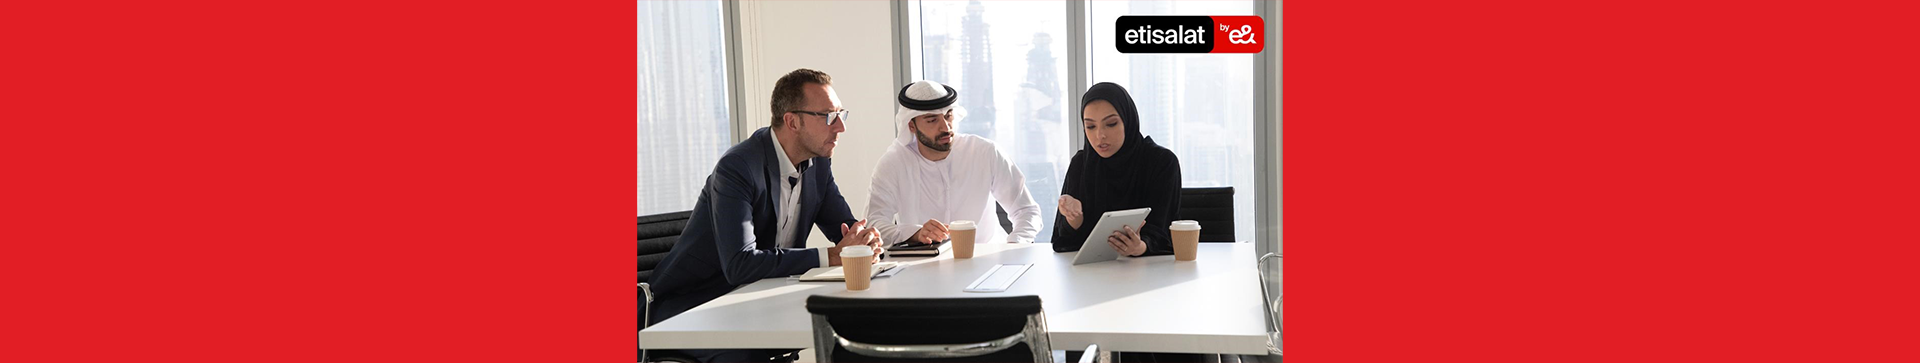 etisalat-by-eand-businessbro-1920x363